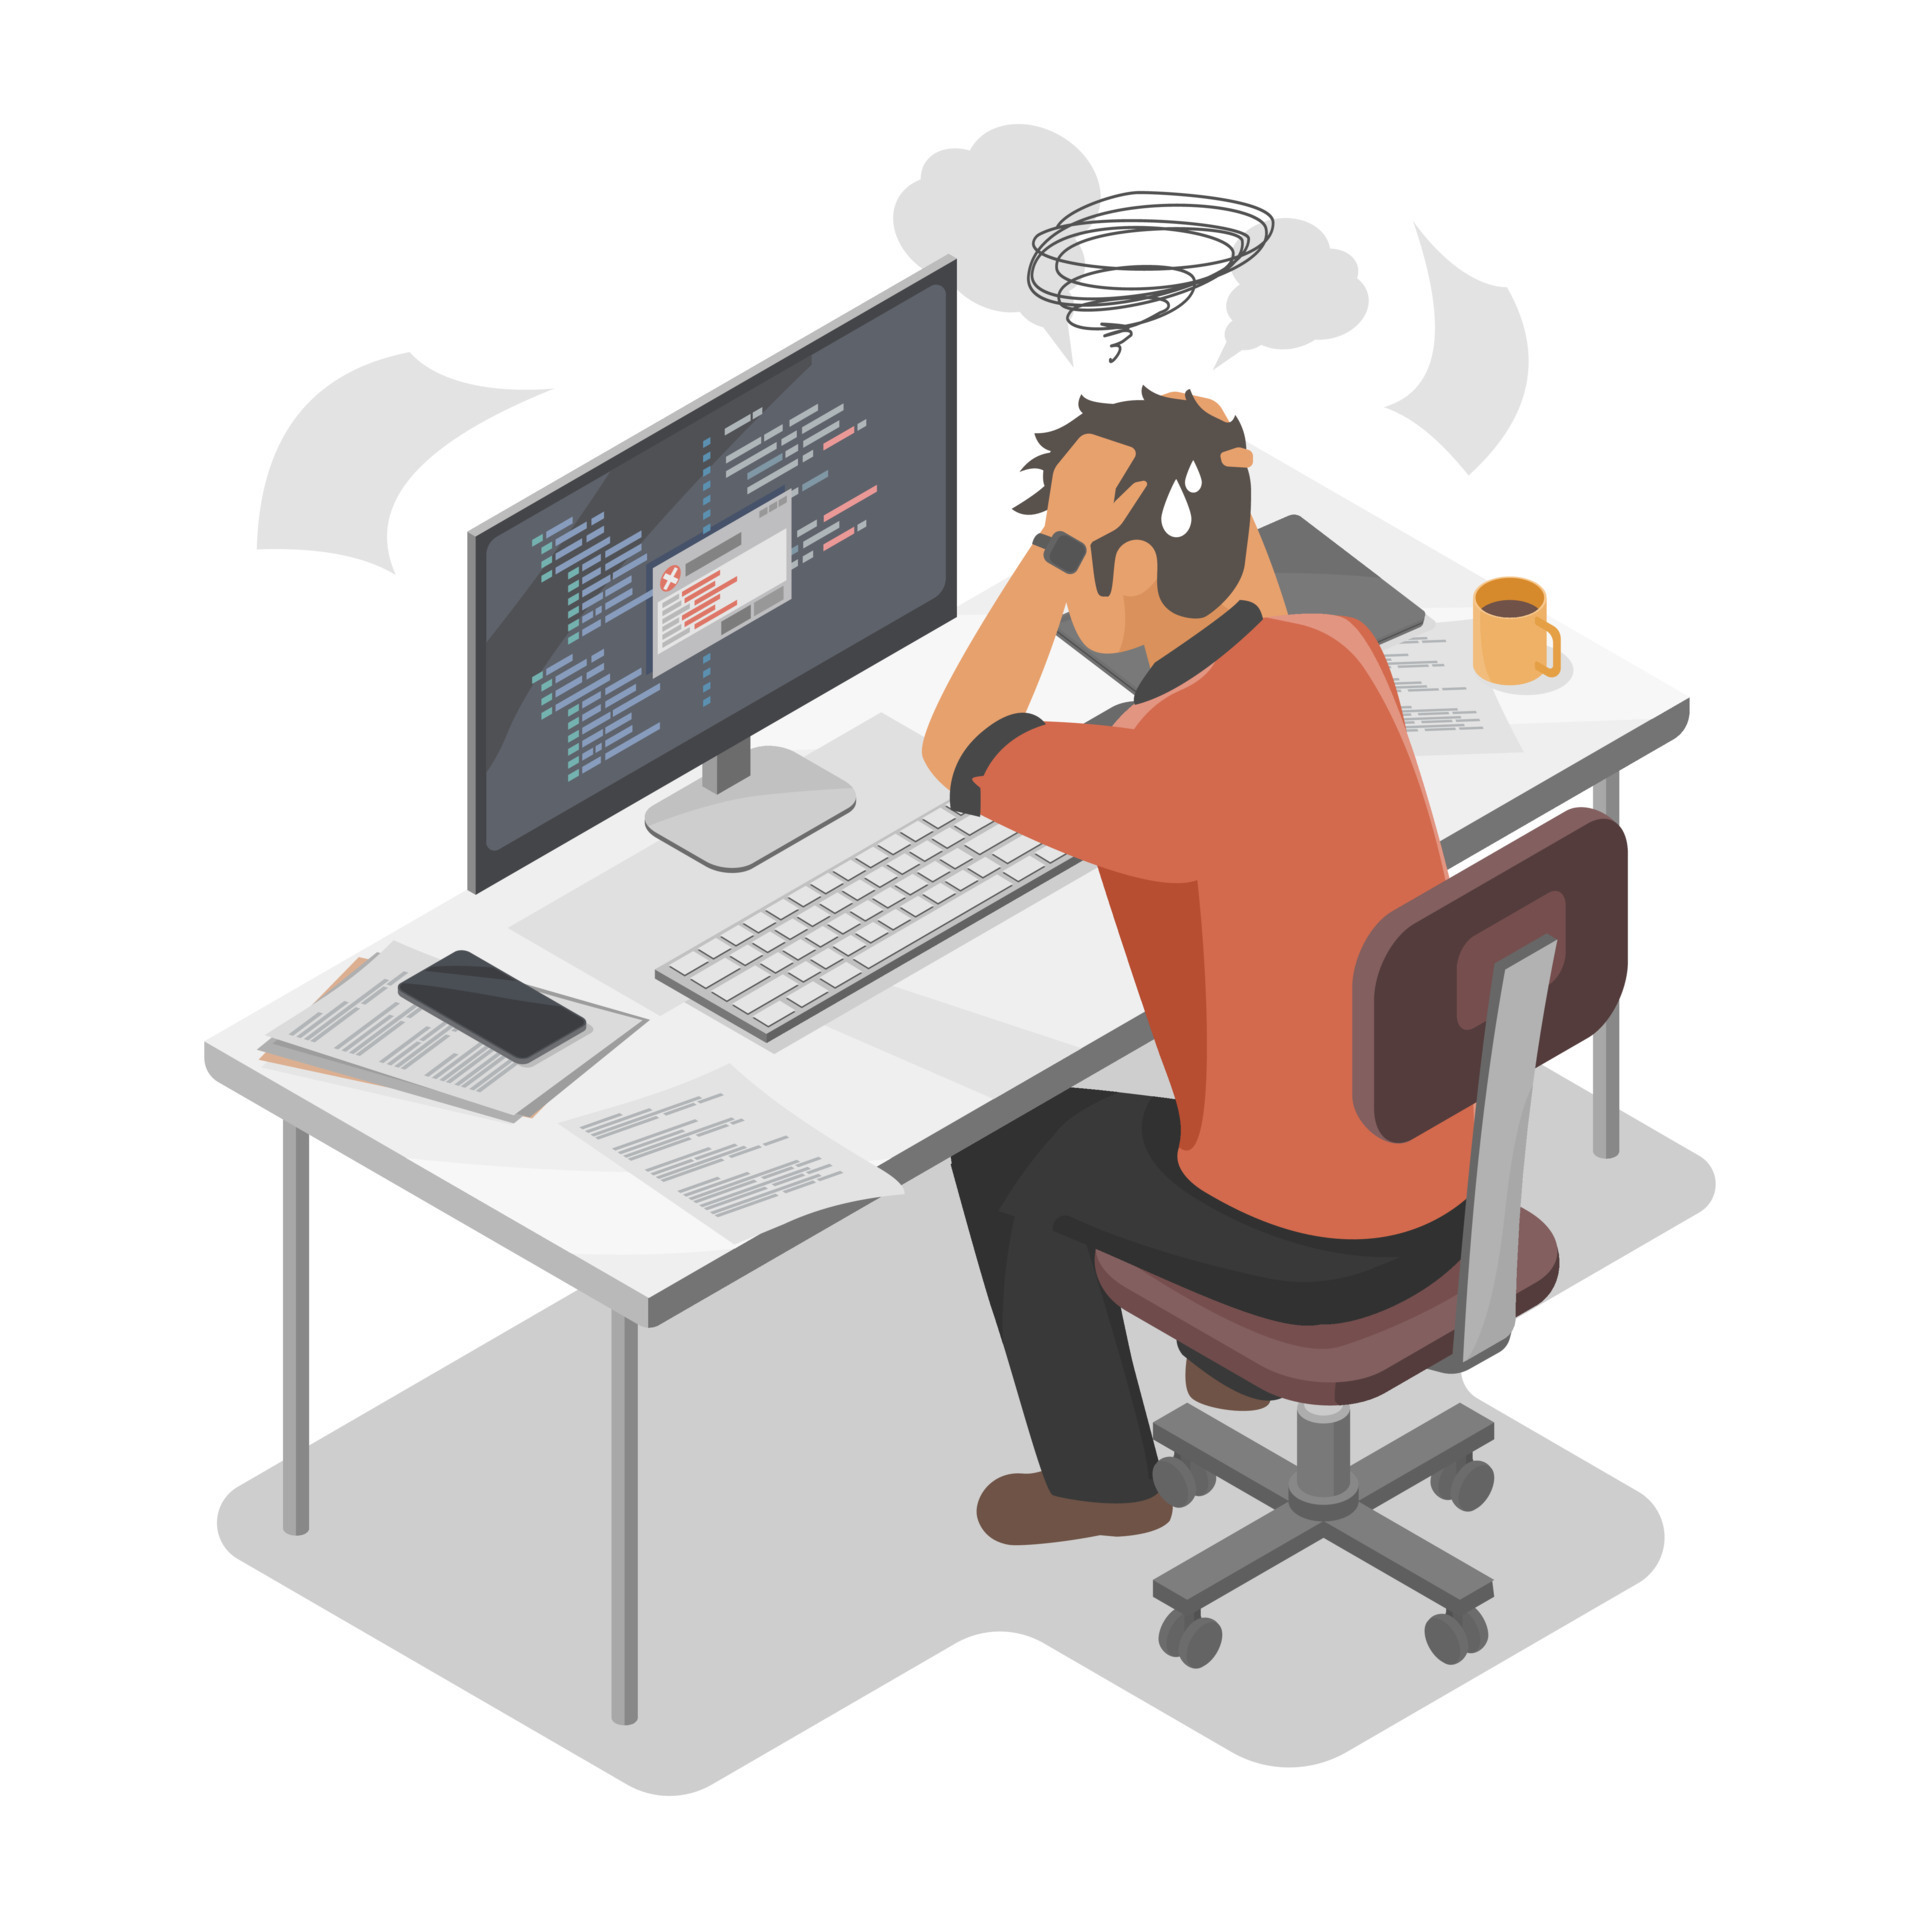 Stress at work in workplace stress crisis or work too hard over times with  Problem bad mental health times Software Engineer Programer Hard working  rush illustration isometric isolated vector cartoon 19981052 Vector